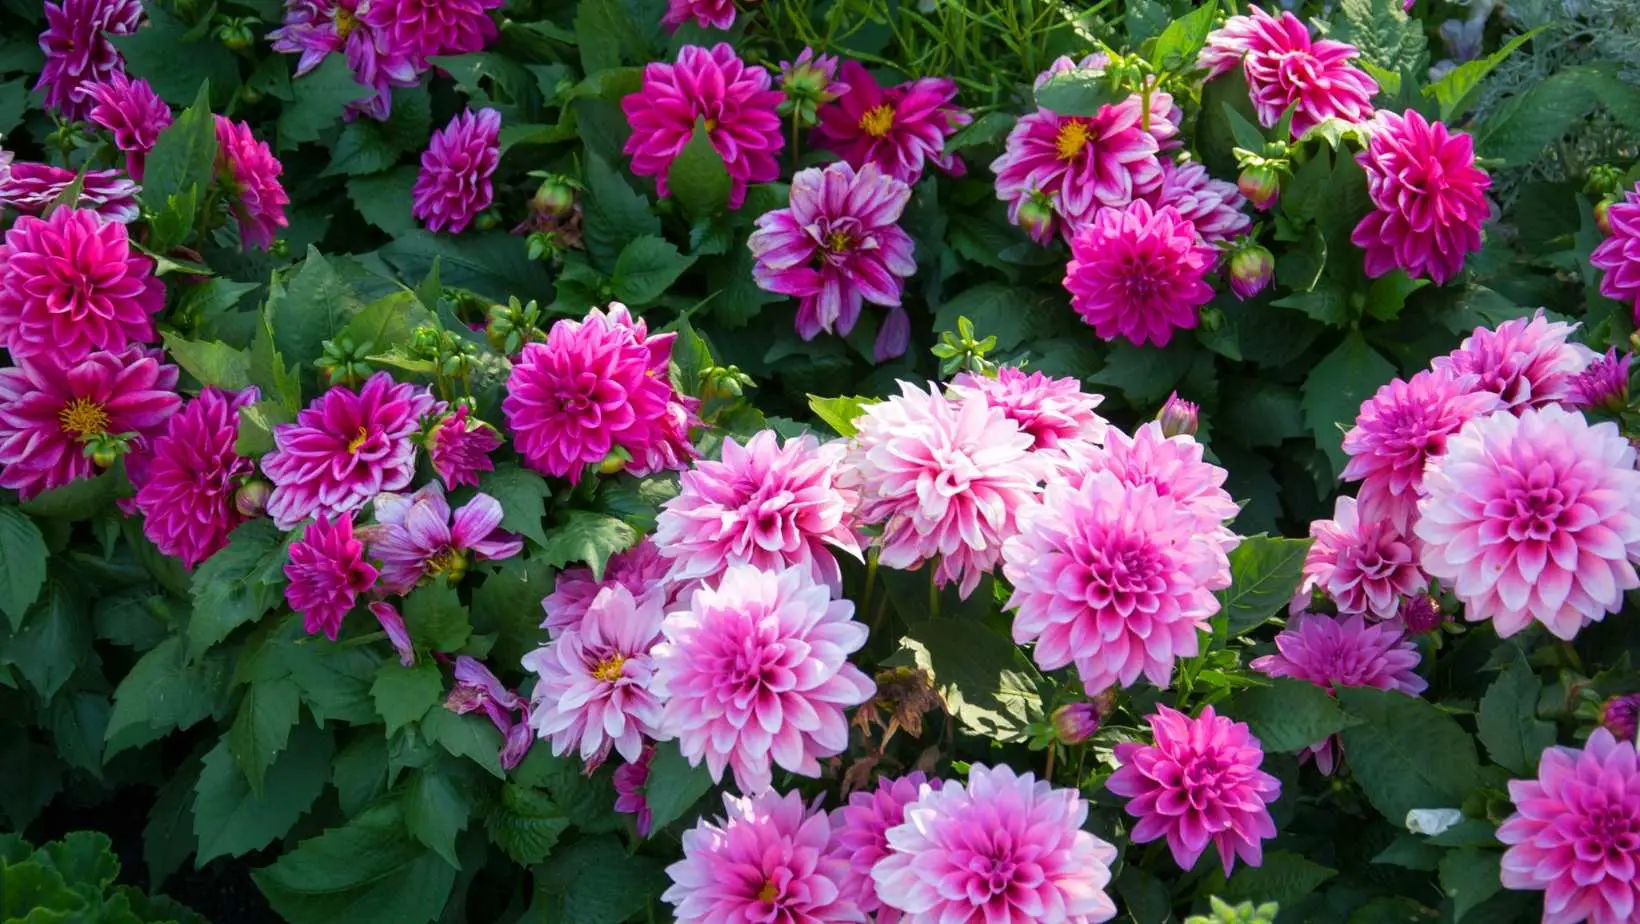 Are Dahlias Poisonous to Cats?